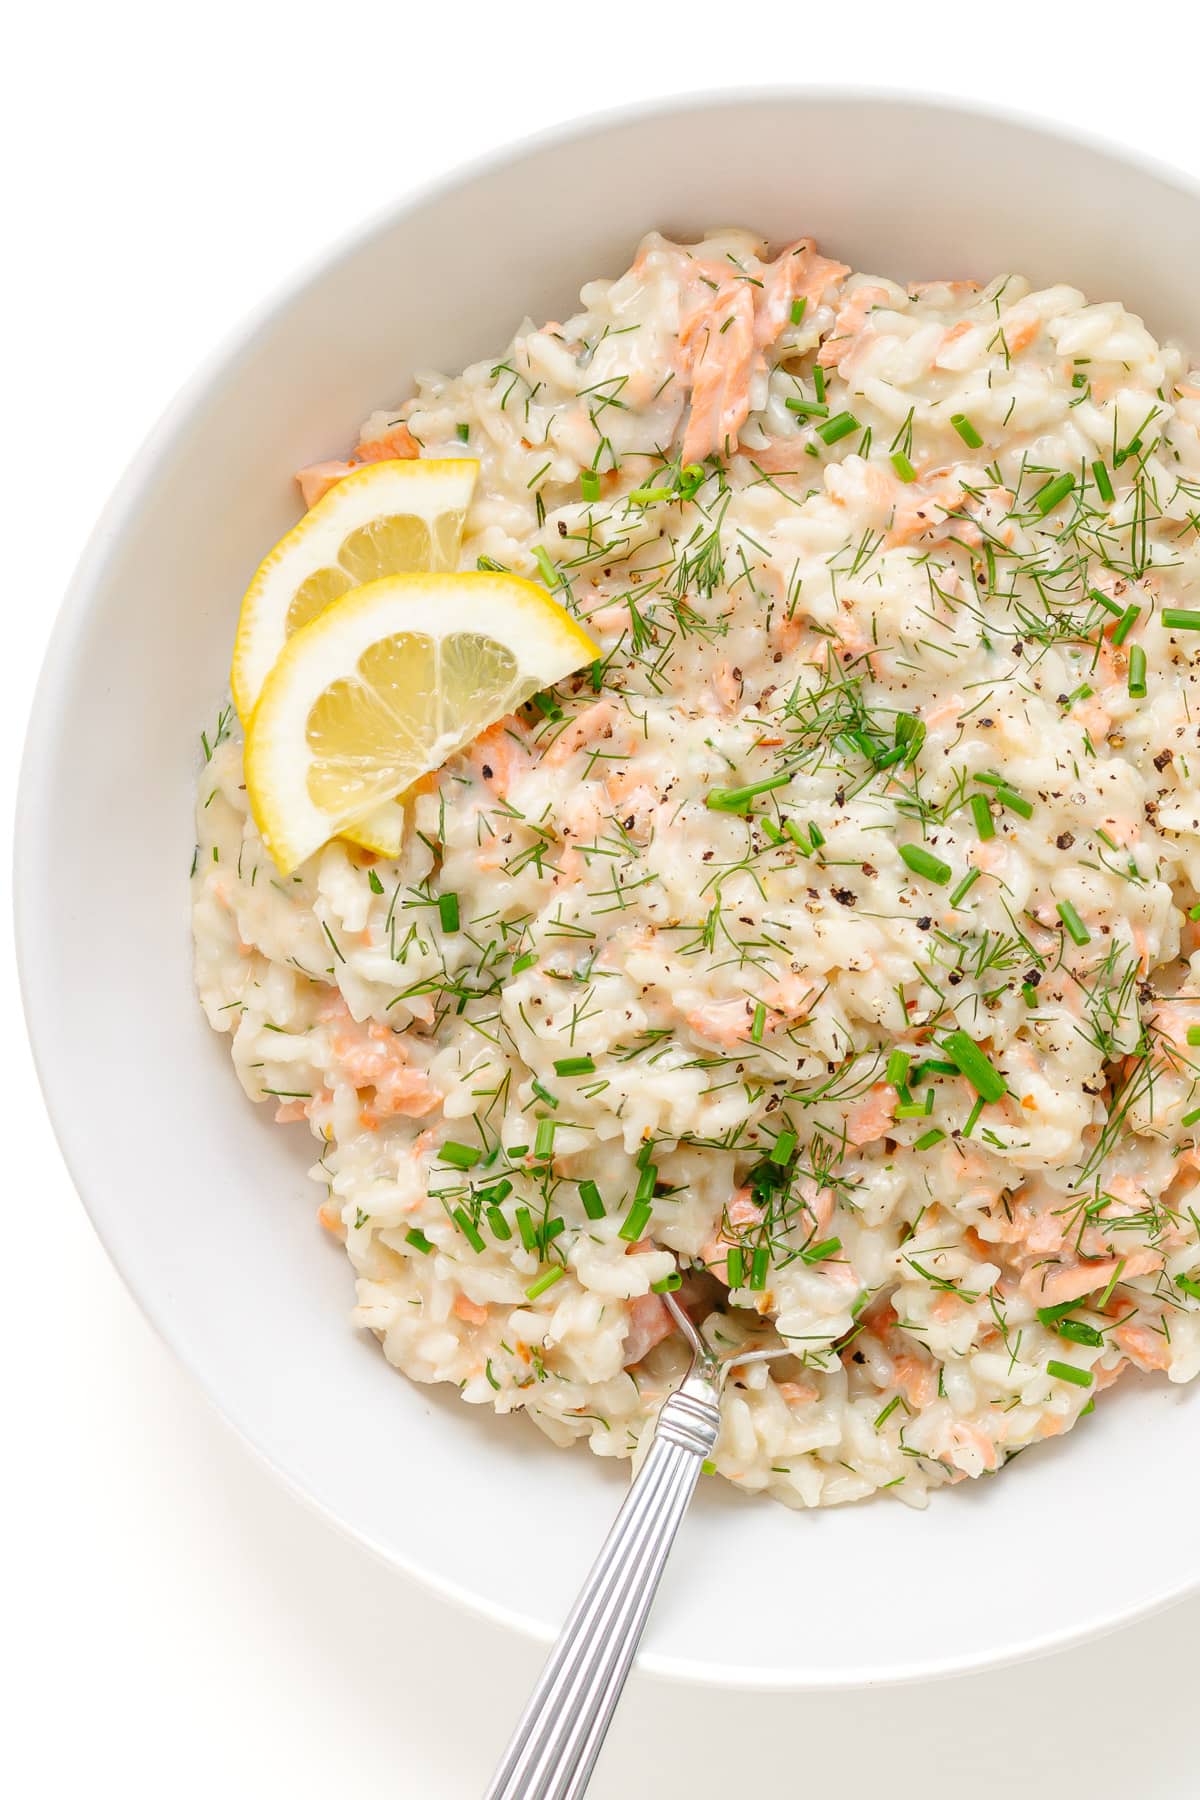 Risotto with salmon and lemon served in a white bowl with spoon.